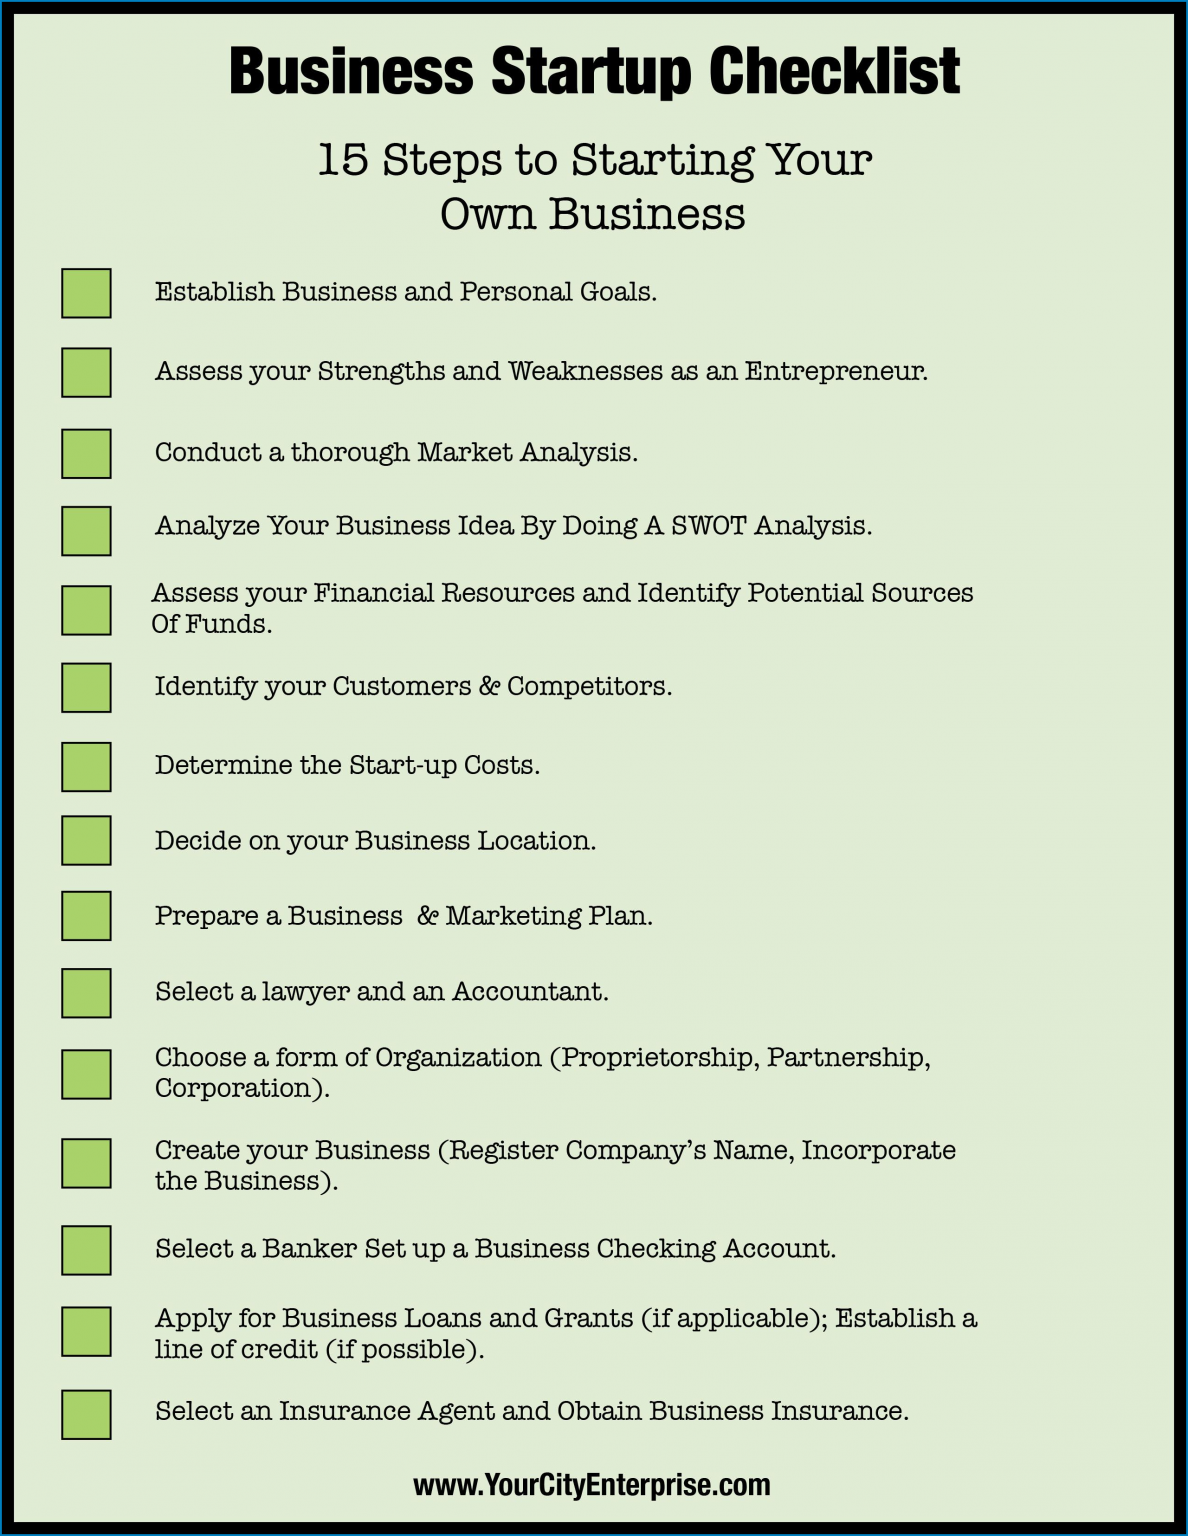 checklist for business plan